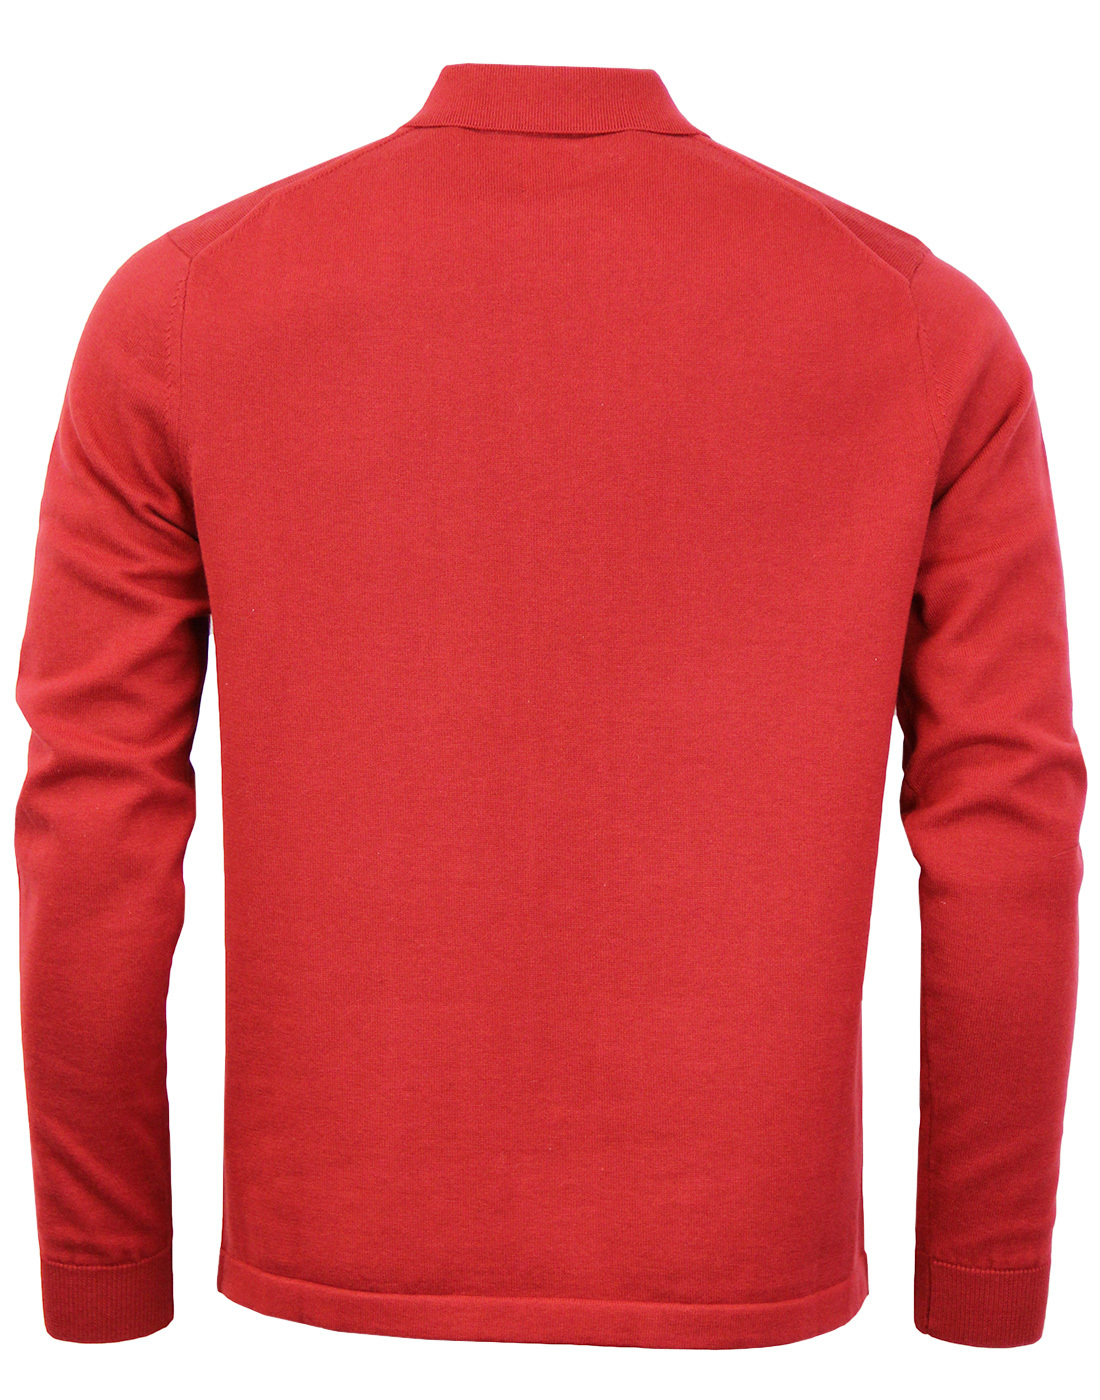 PRETTY GREEN Parlington Knitted Mod Polo Cardigan in Dark Red